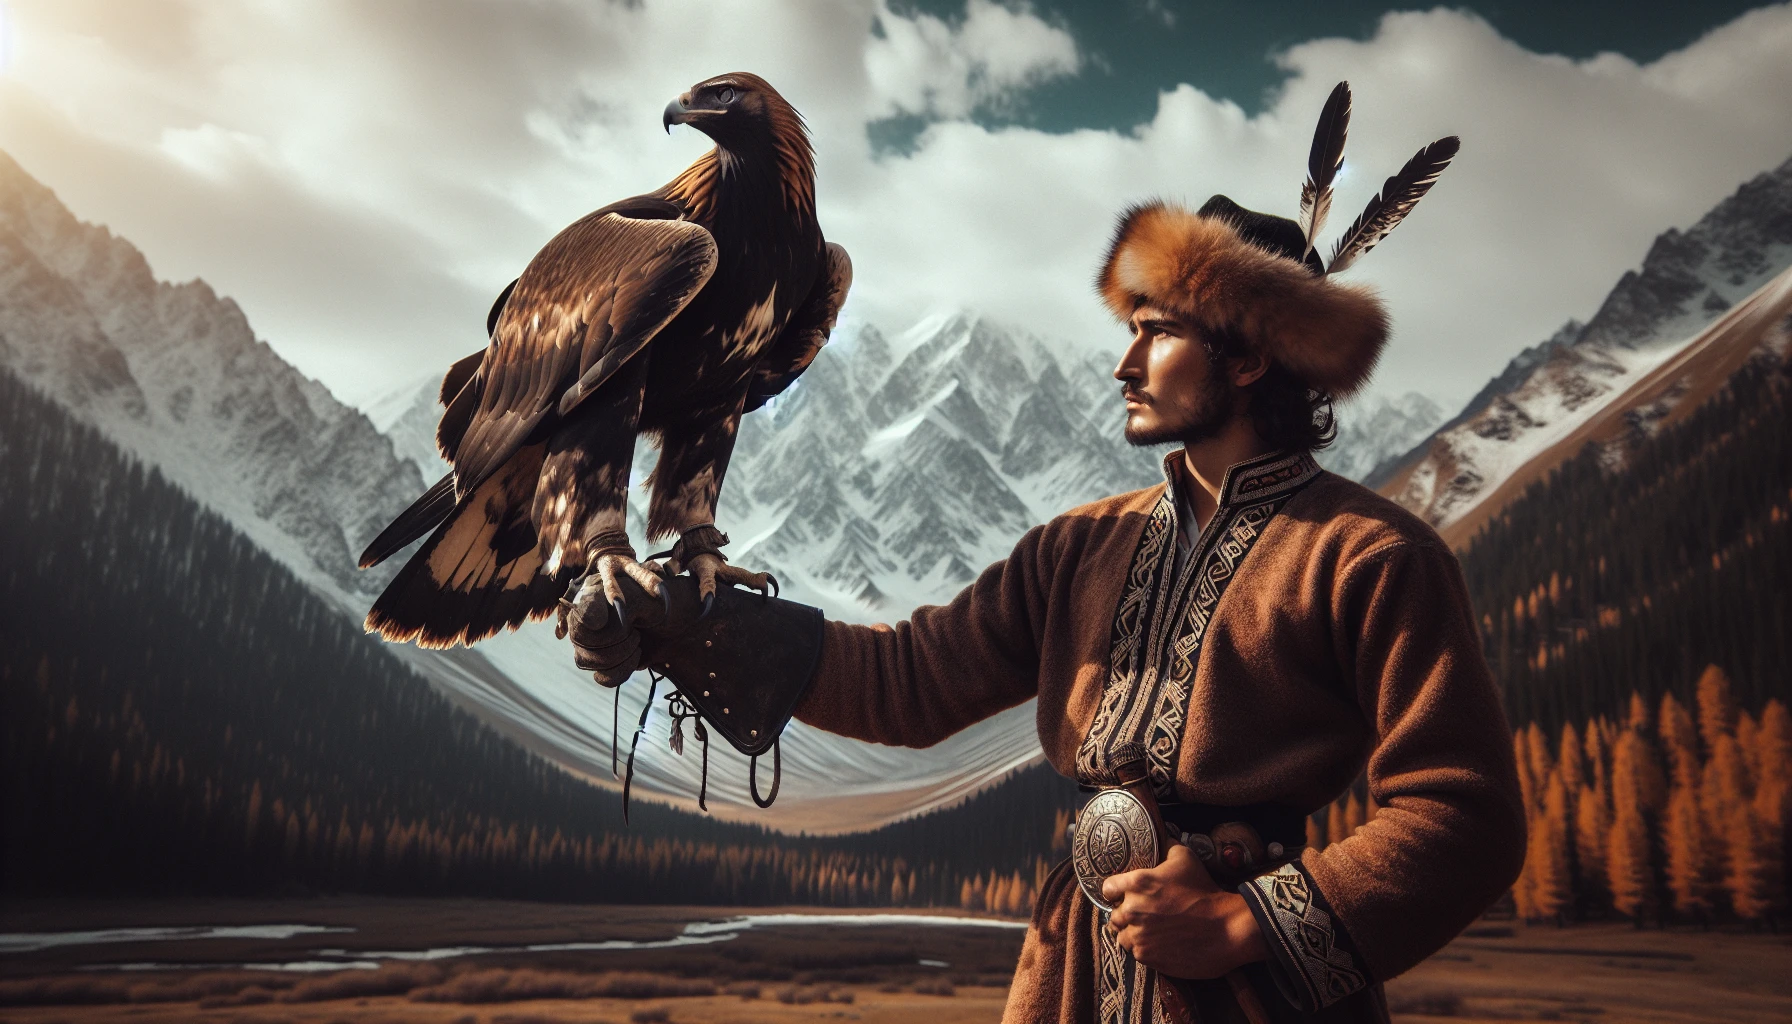 A majestic golden eagle perched on the arm of a Kazakh eagle hunter in the Altai Mountains